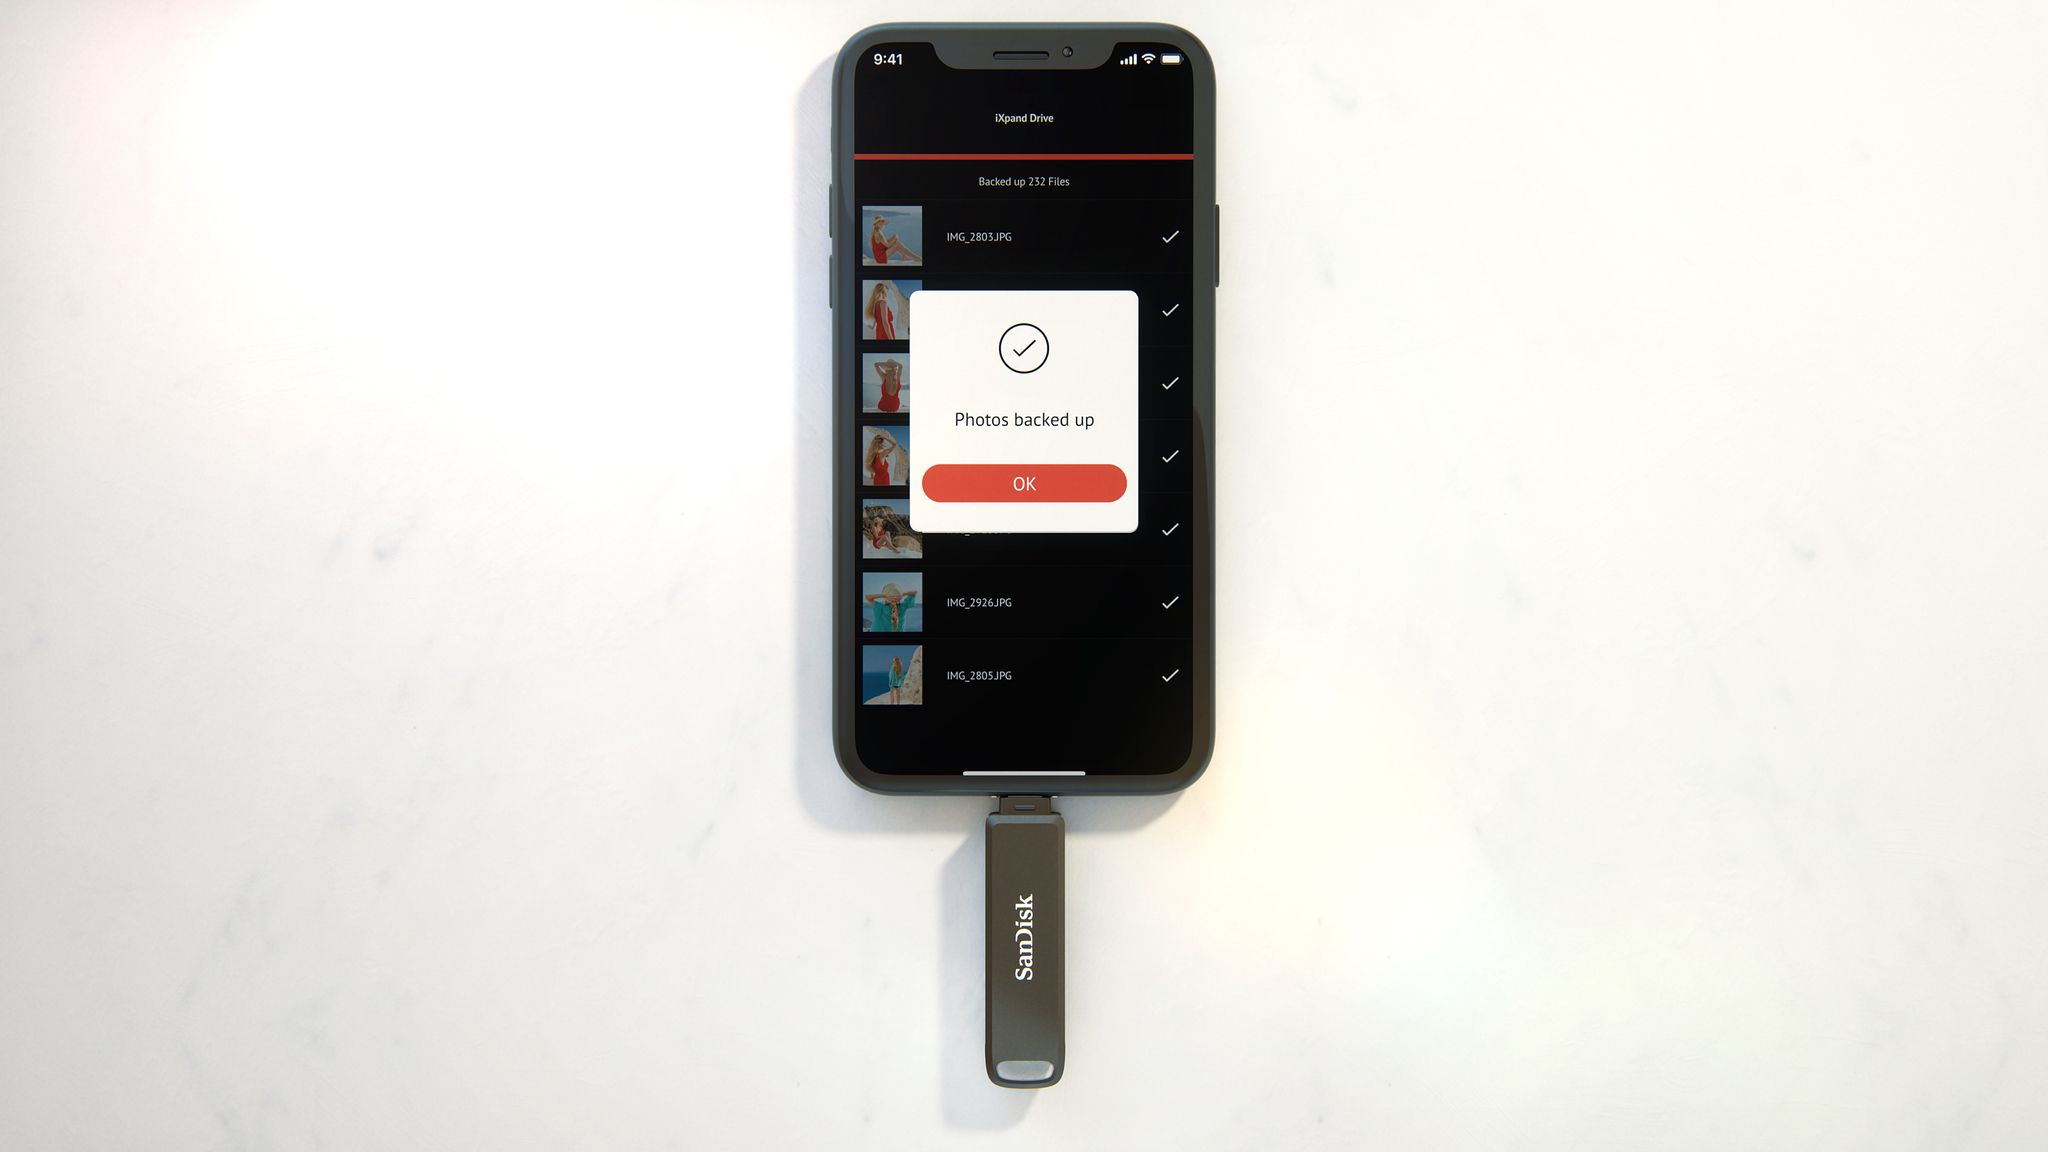 iXpand flash disk luxe connected to iphone